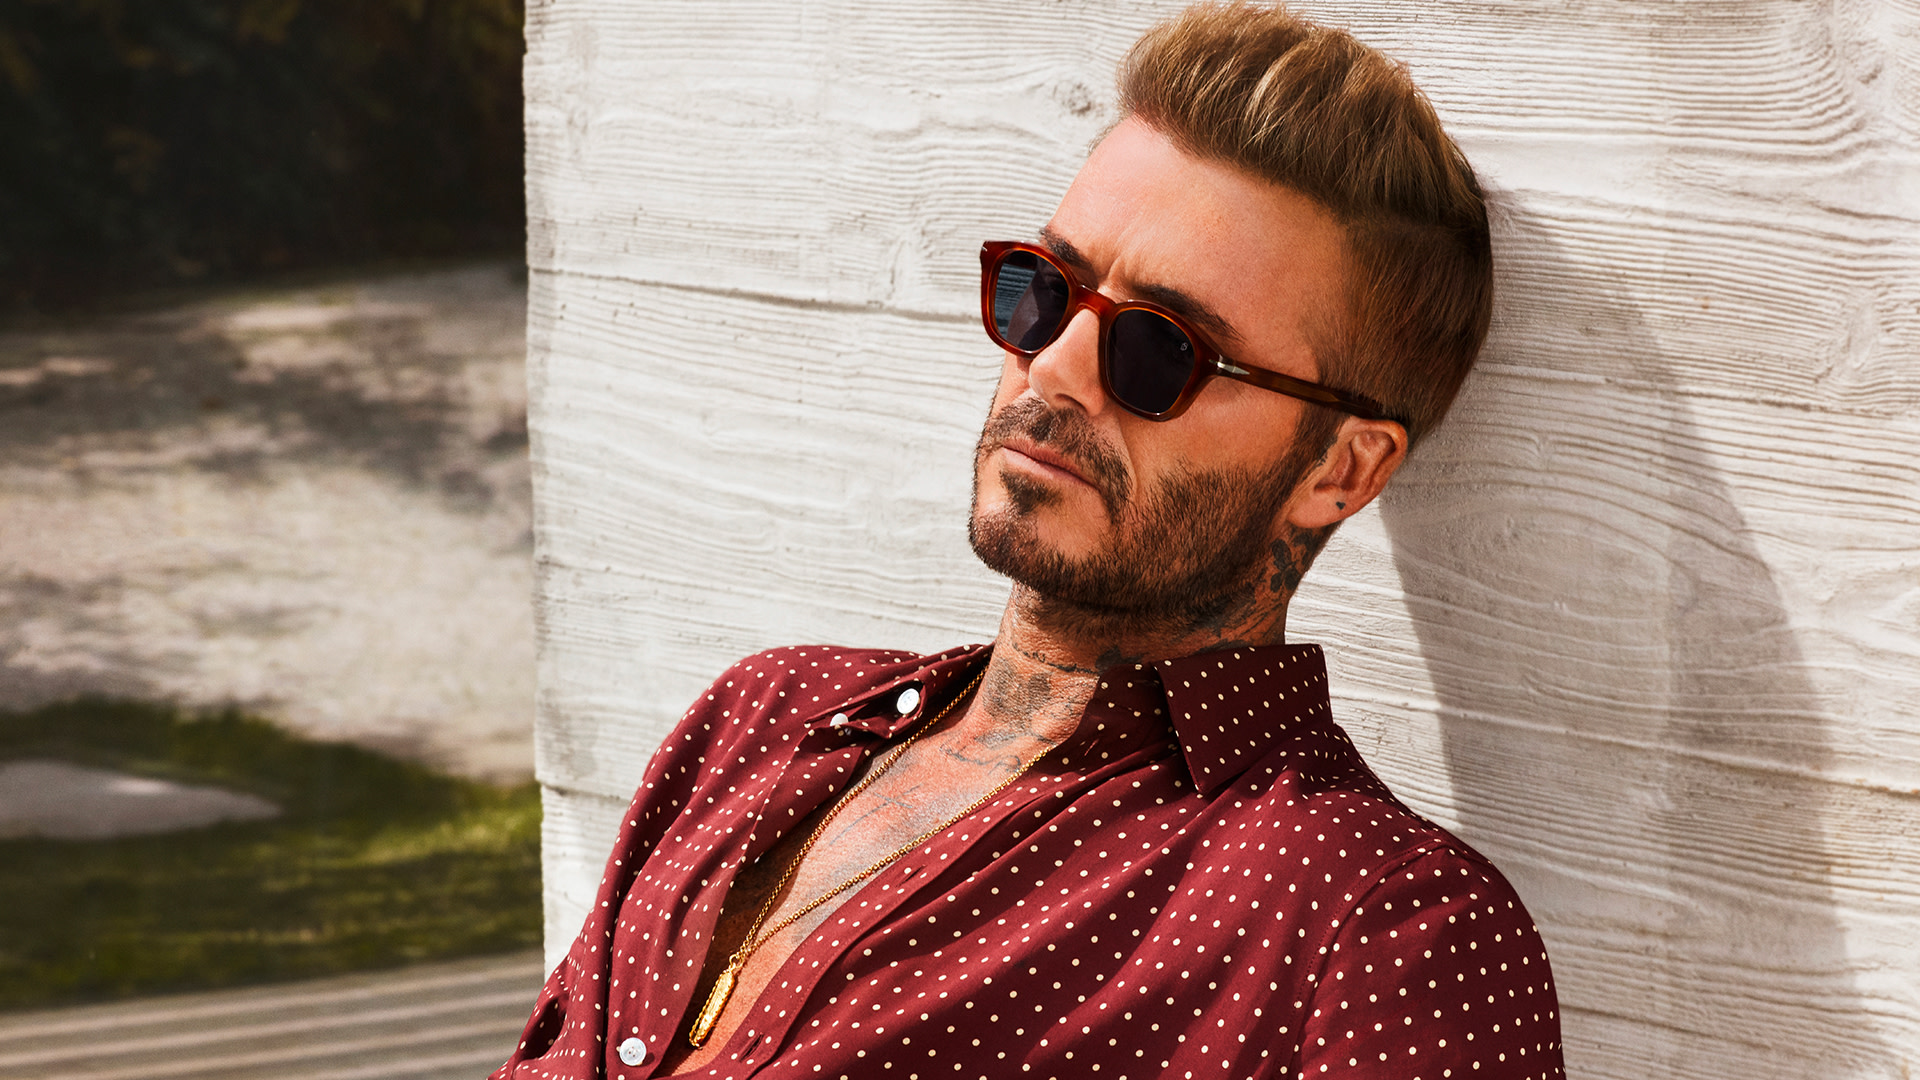 LVR introduces SS21 collection from EYEWEAR by DAVID BECKHAM